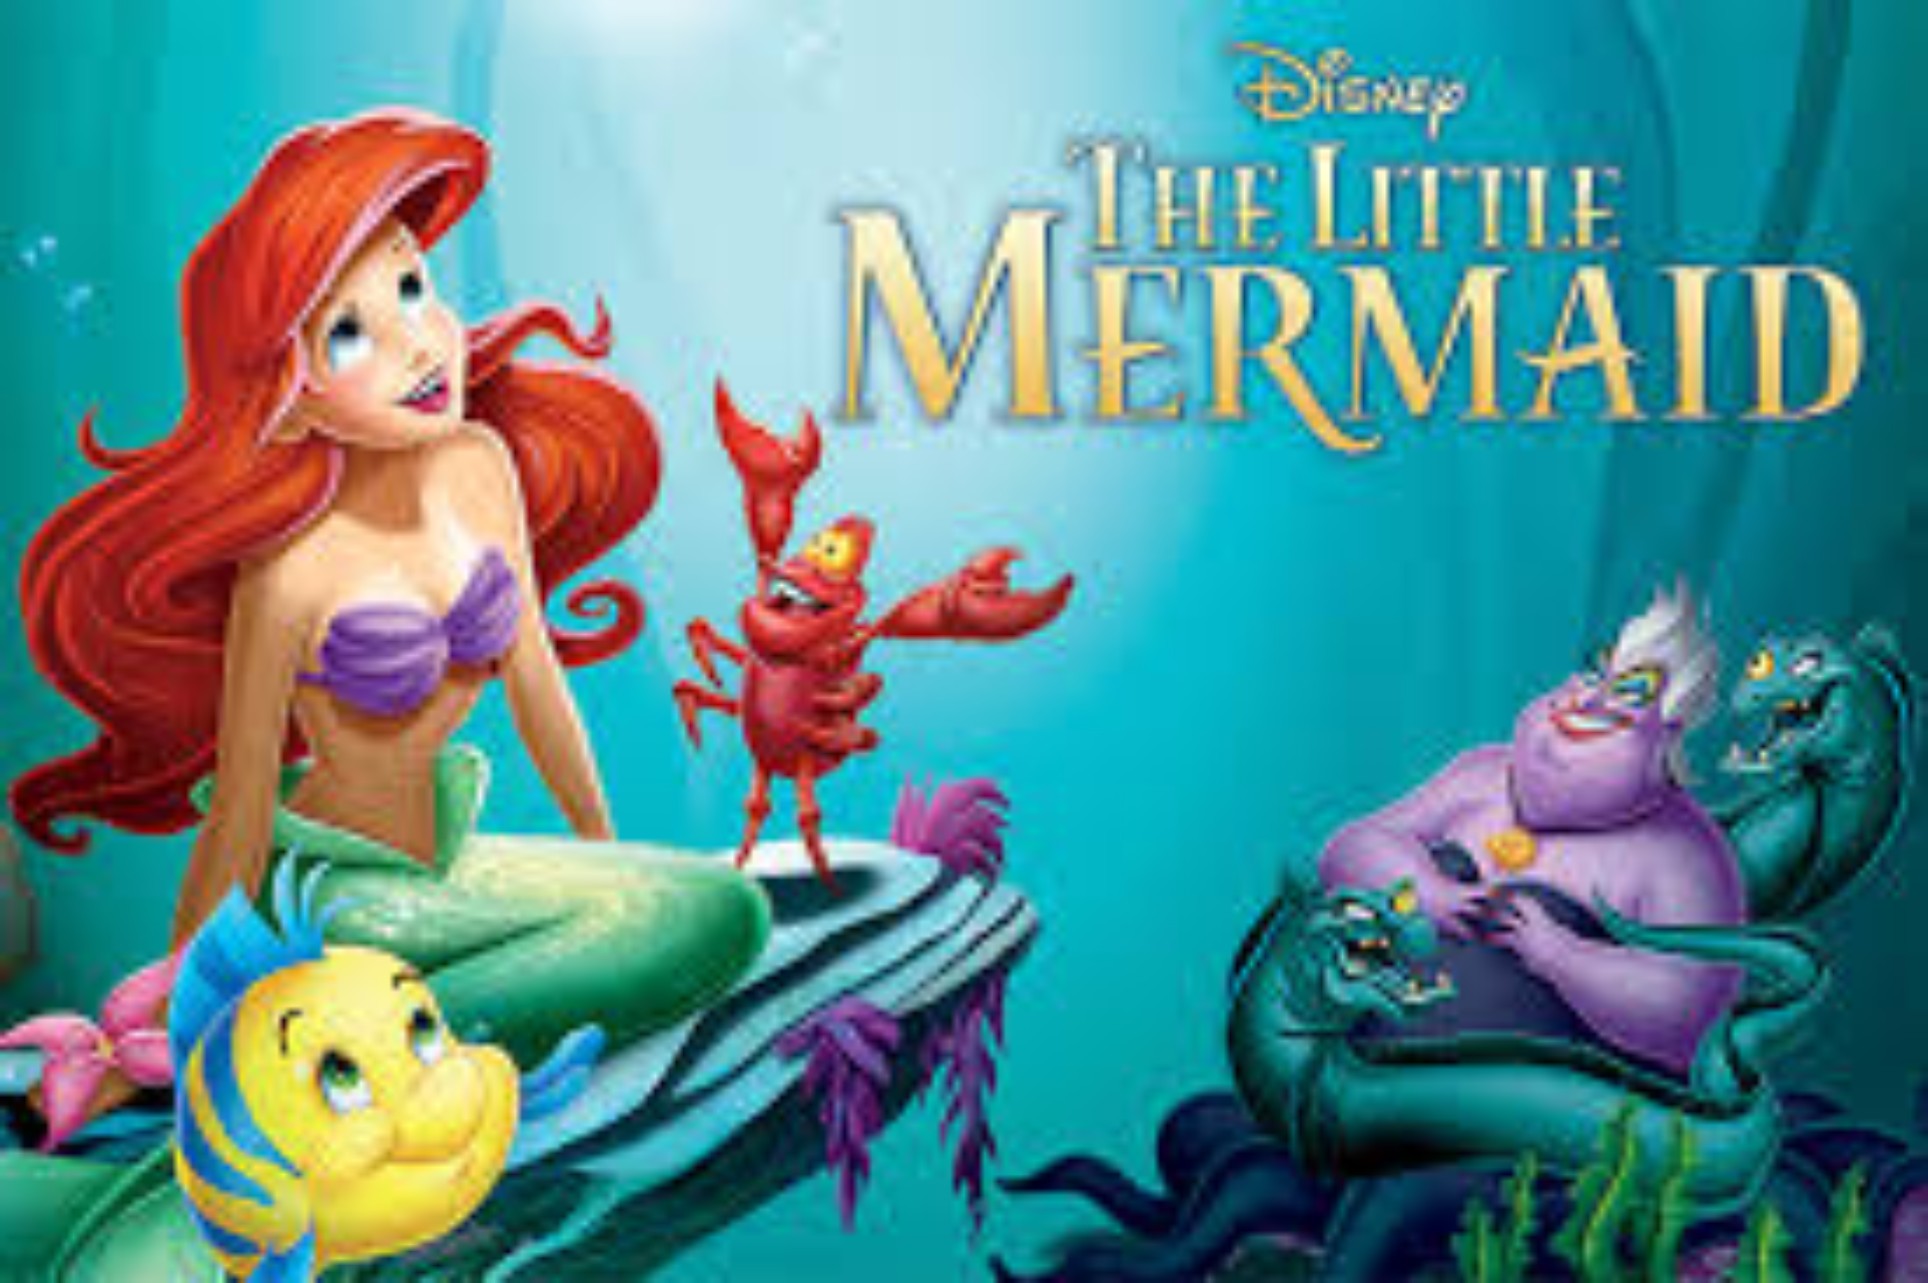 Is The Little Mermaid coming up with new film?